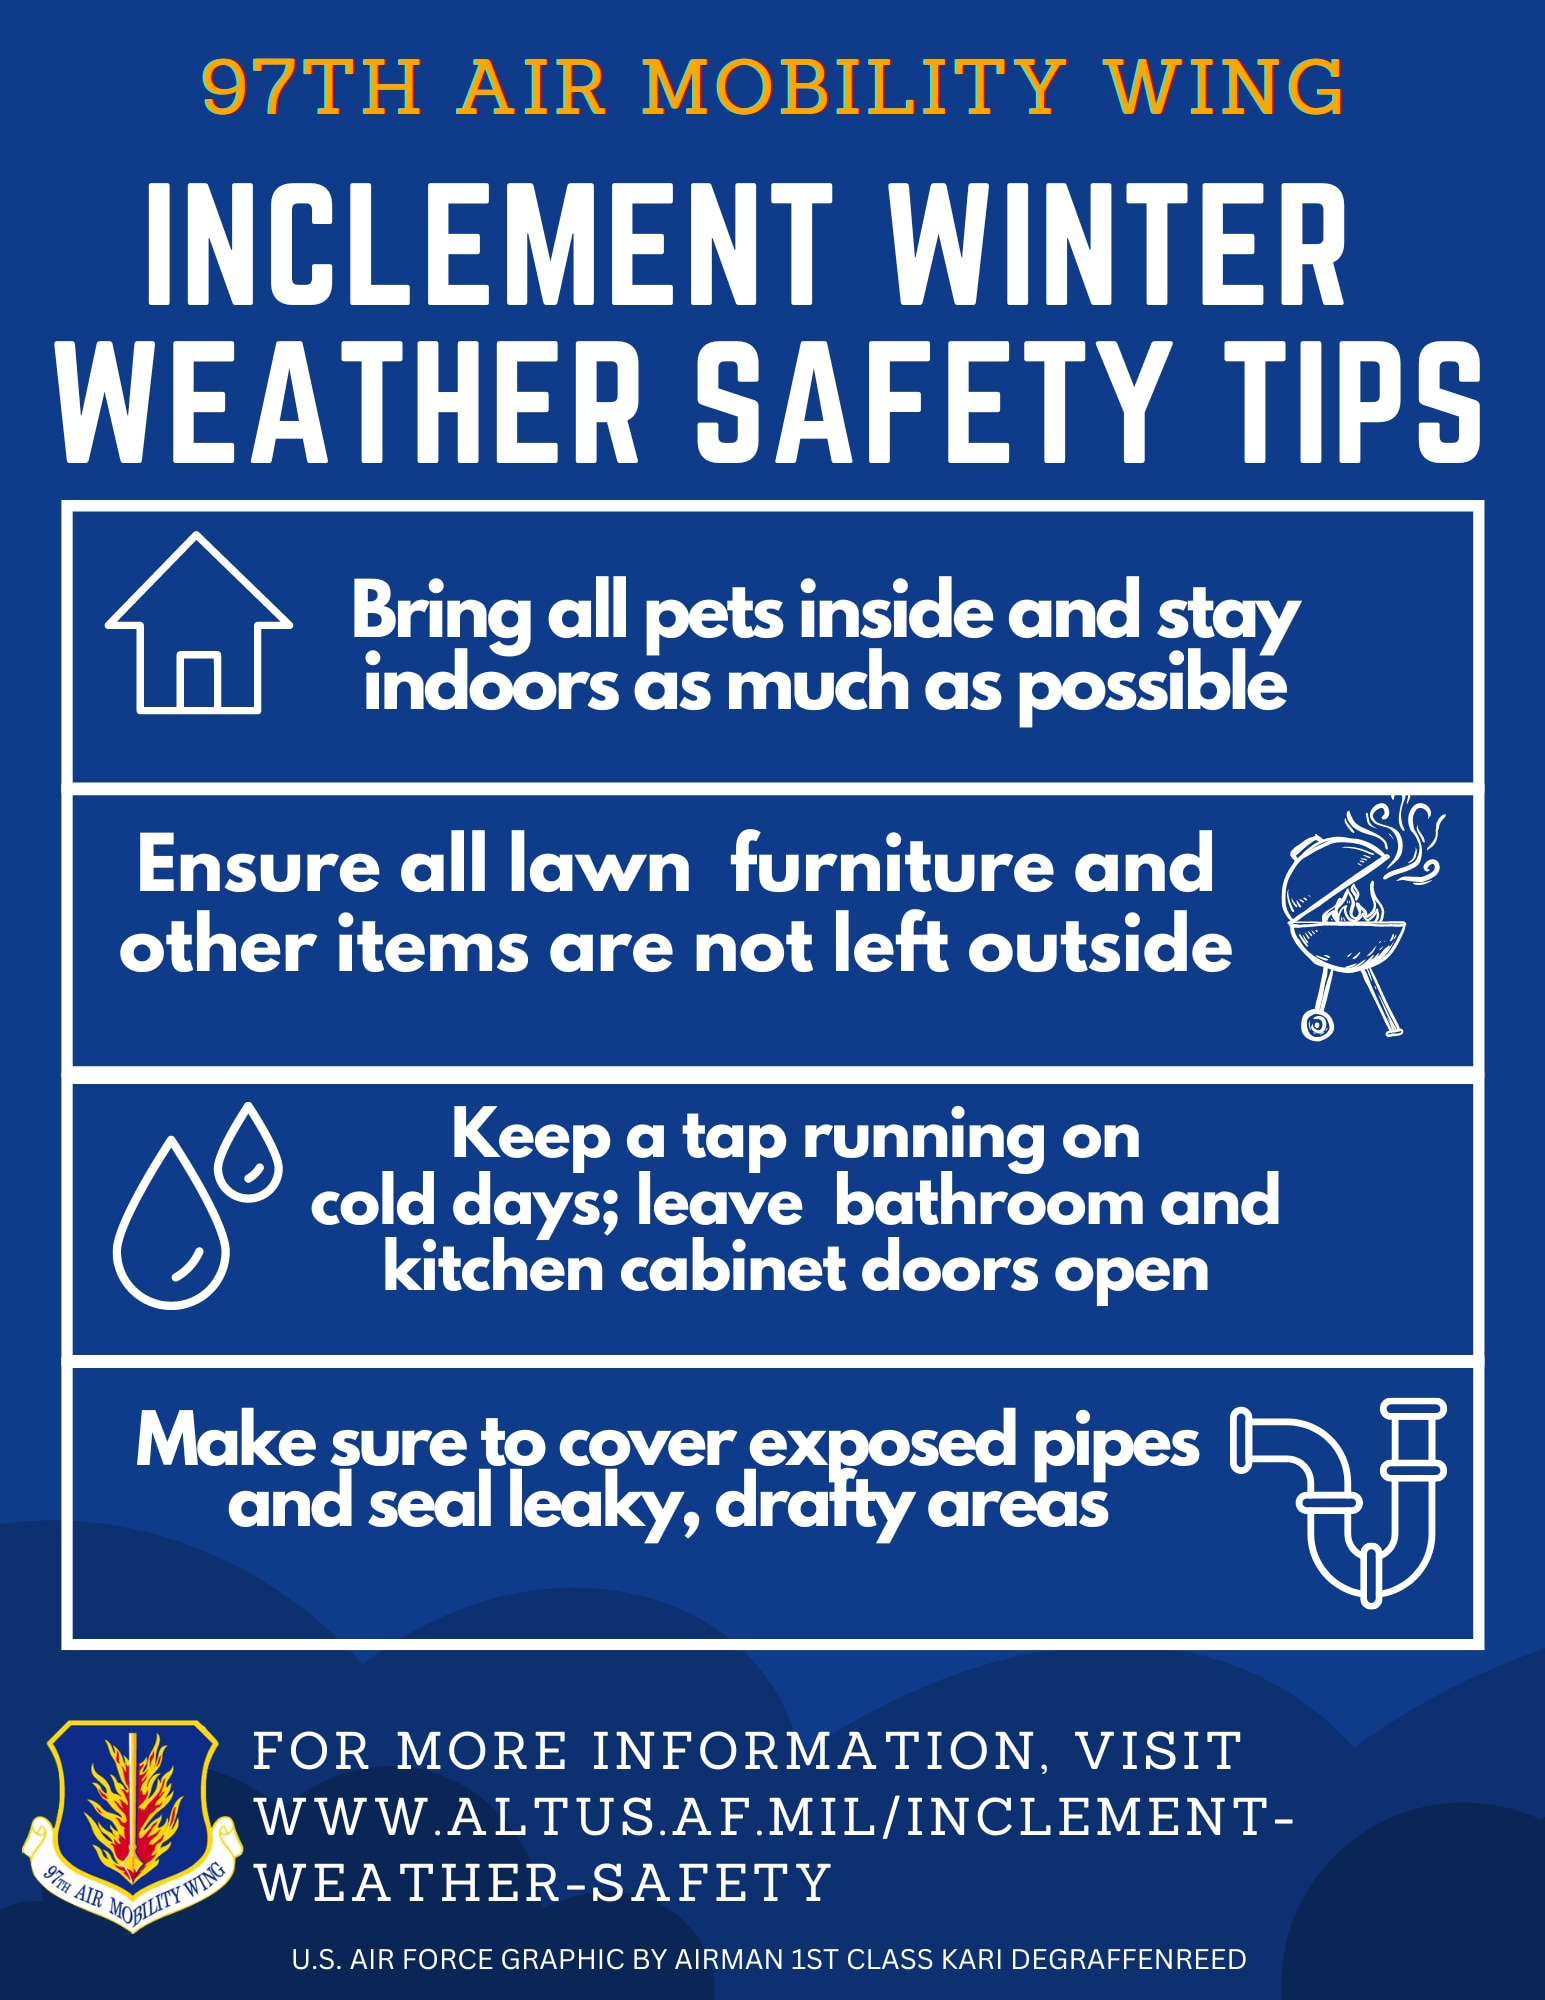 AAFB Inclement Weather Safety Tips > Air Force Safety Center > Article